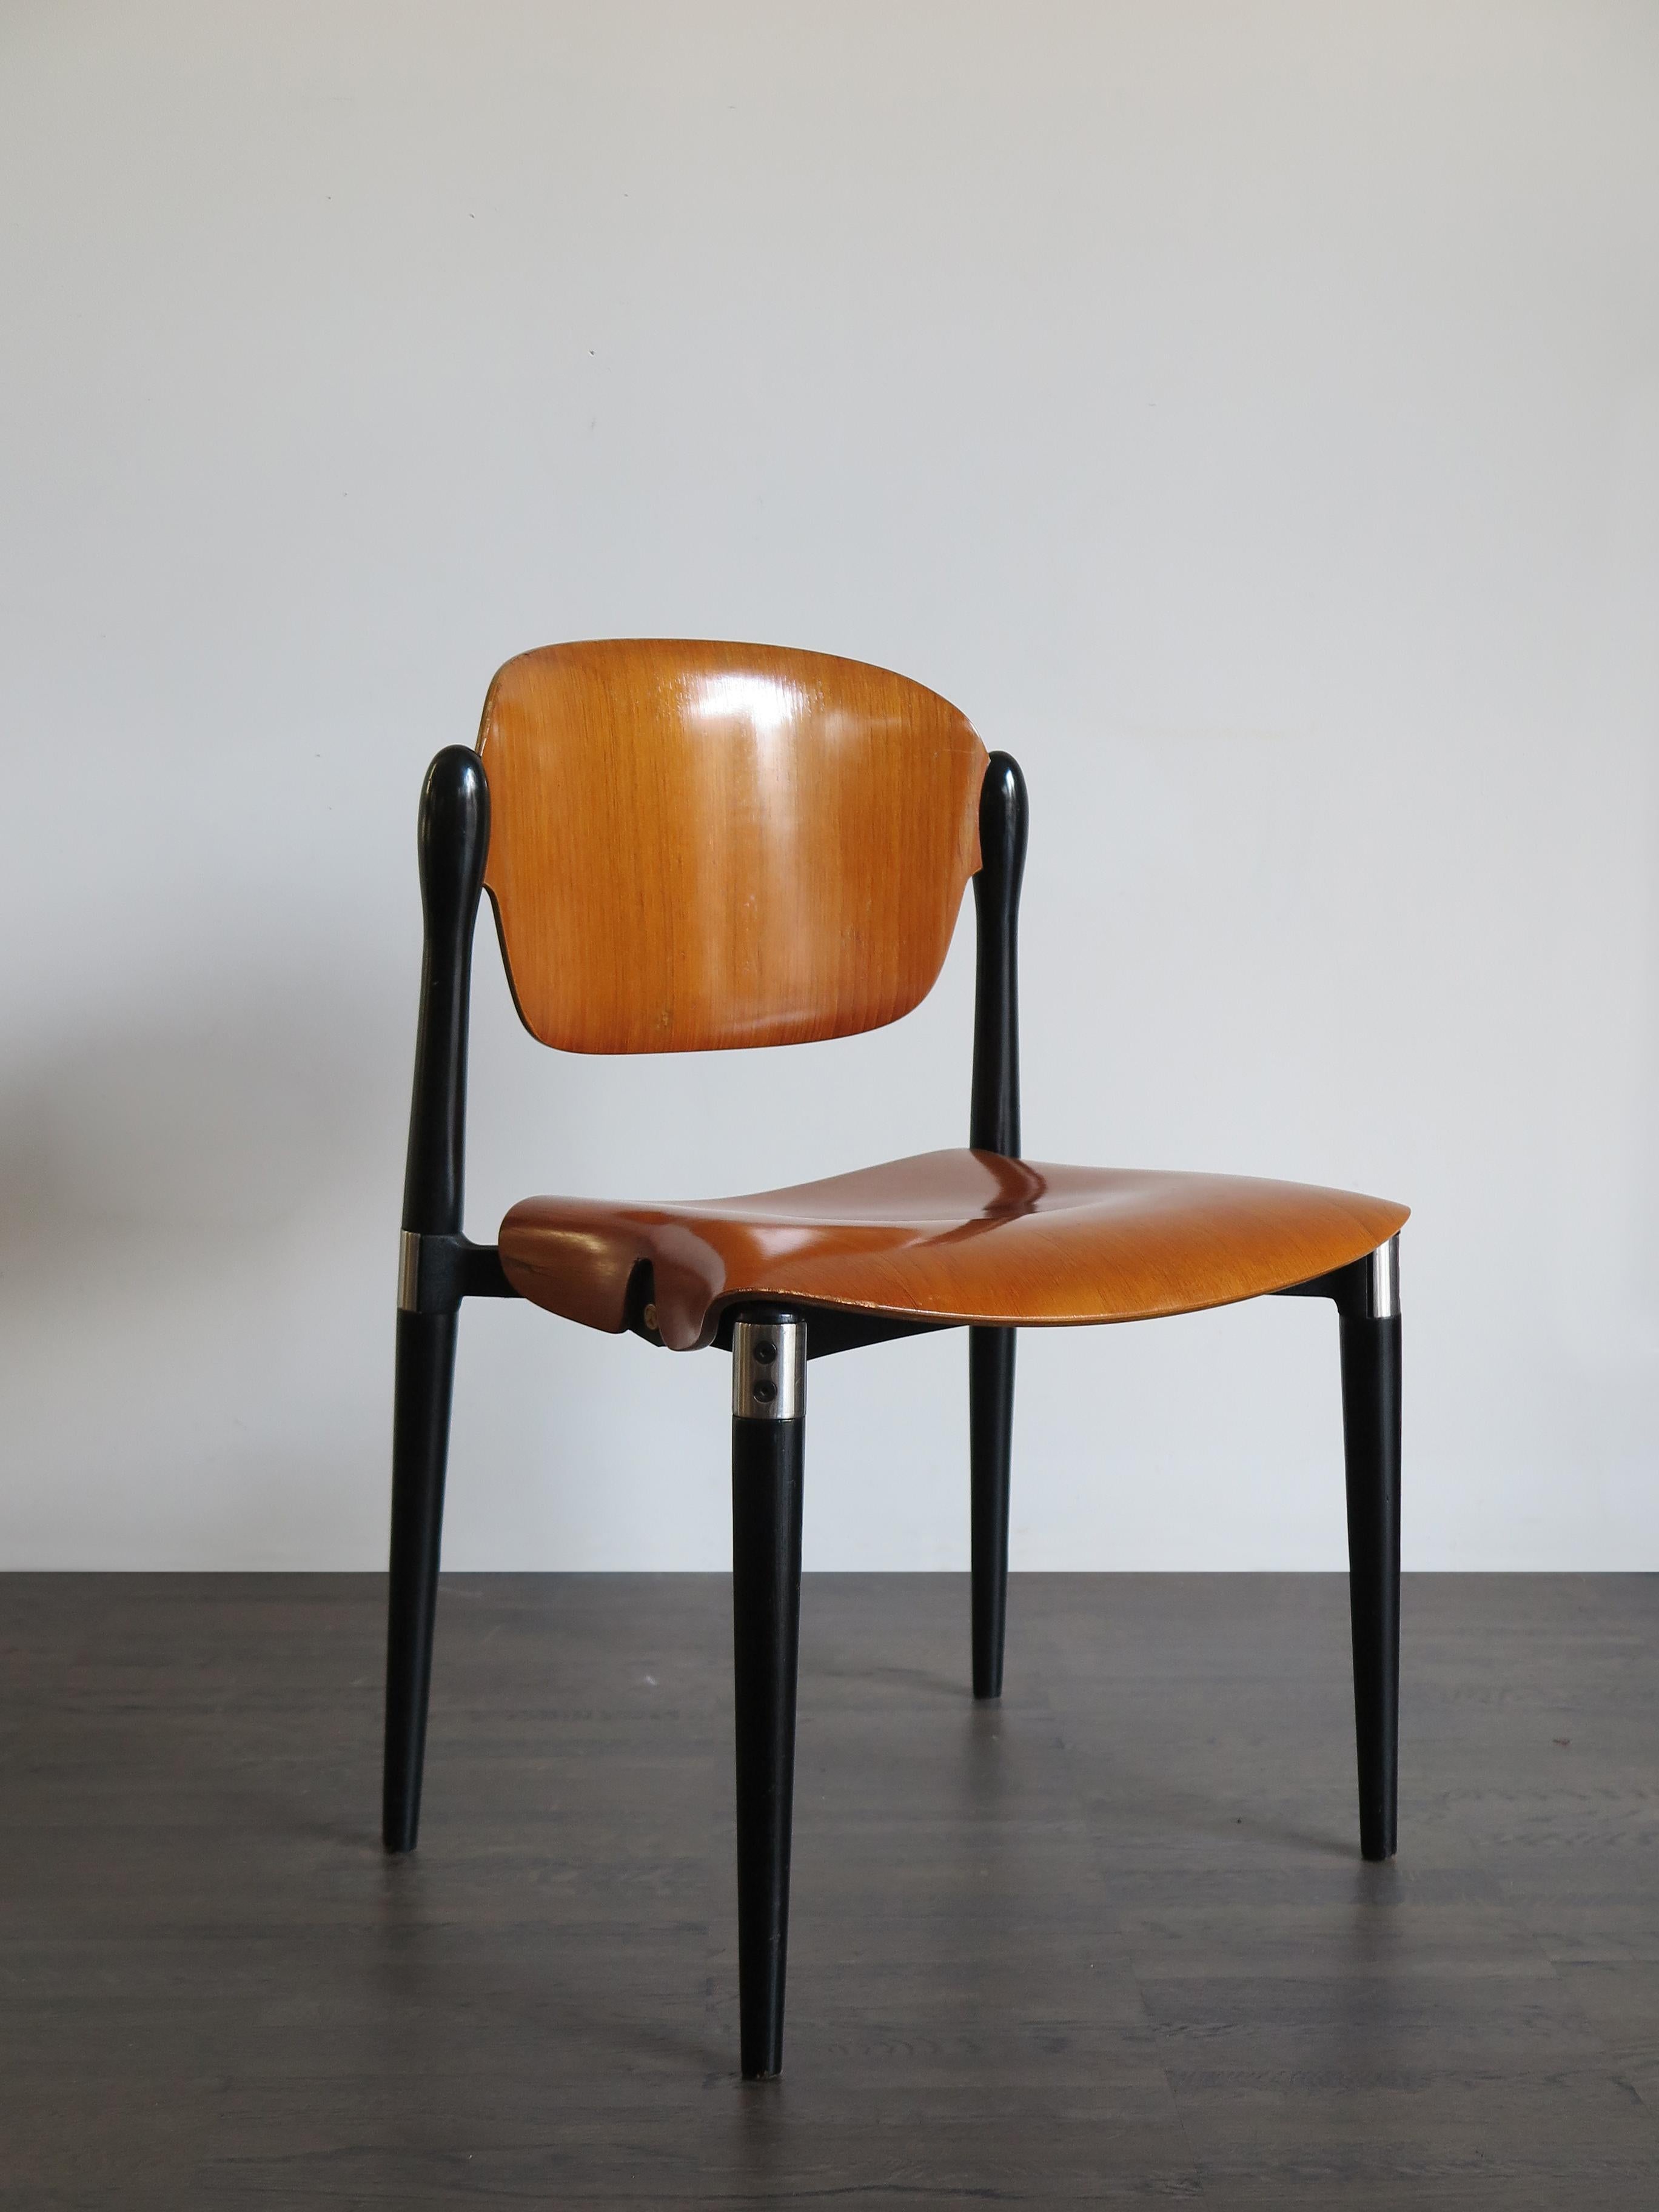 Eugenio Gerli for Tecno Italian Curved Wood Dining Chairs Model “S832”, 1962 1